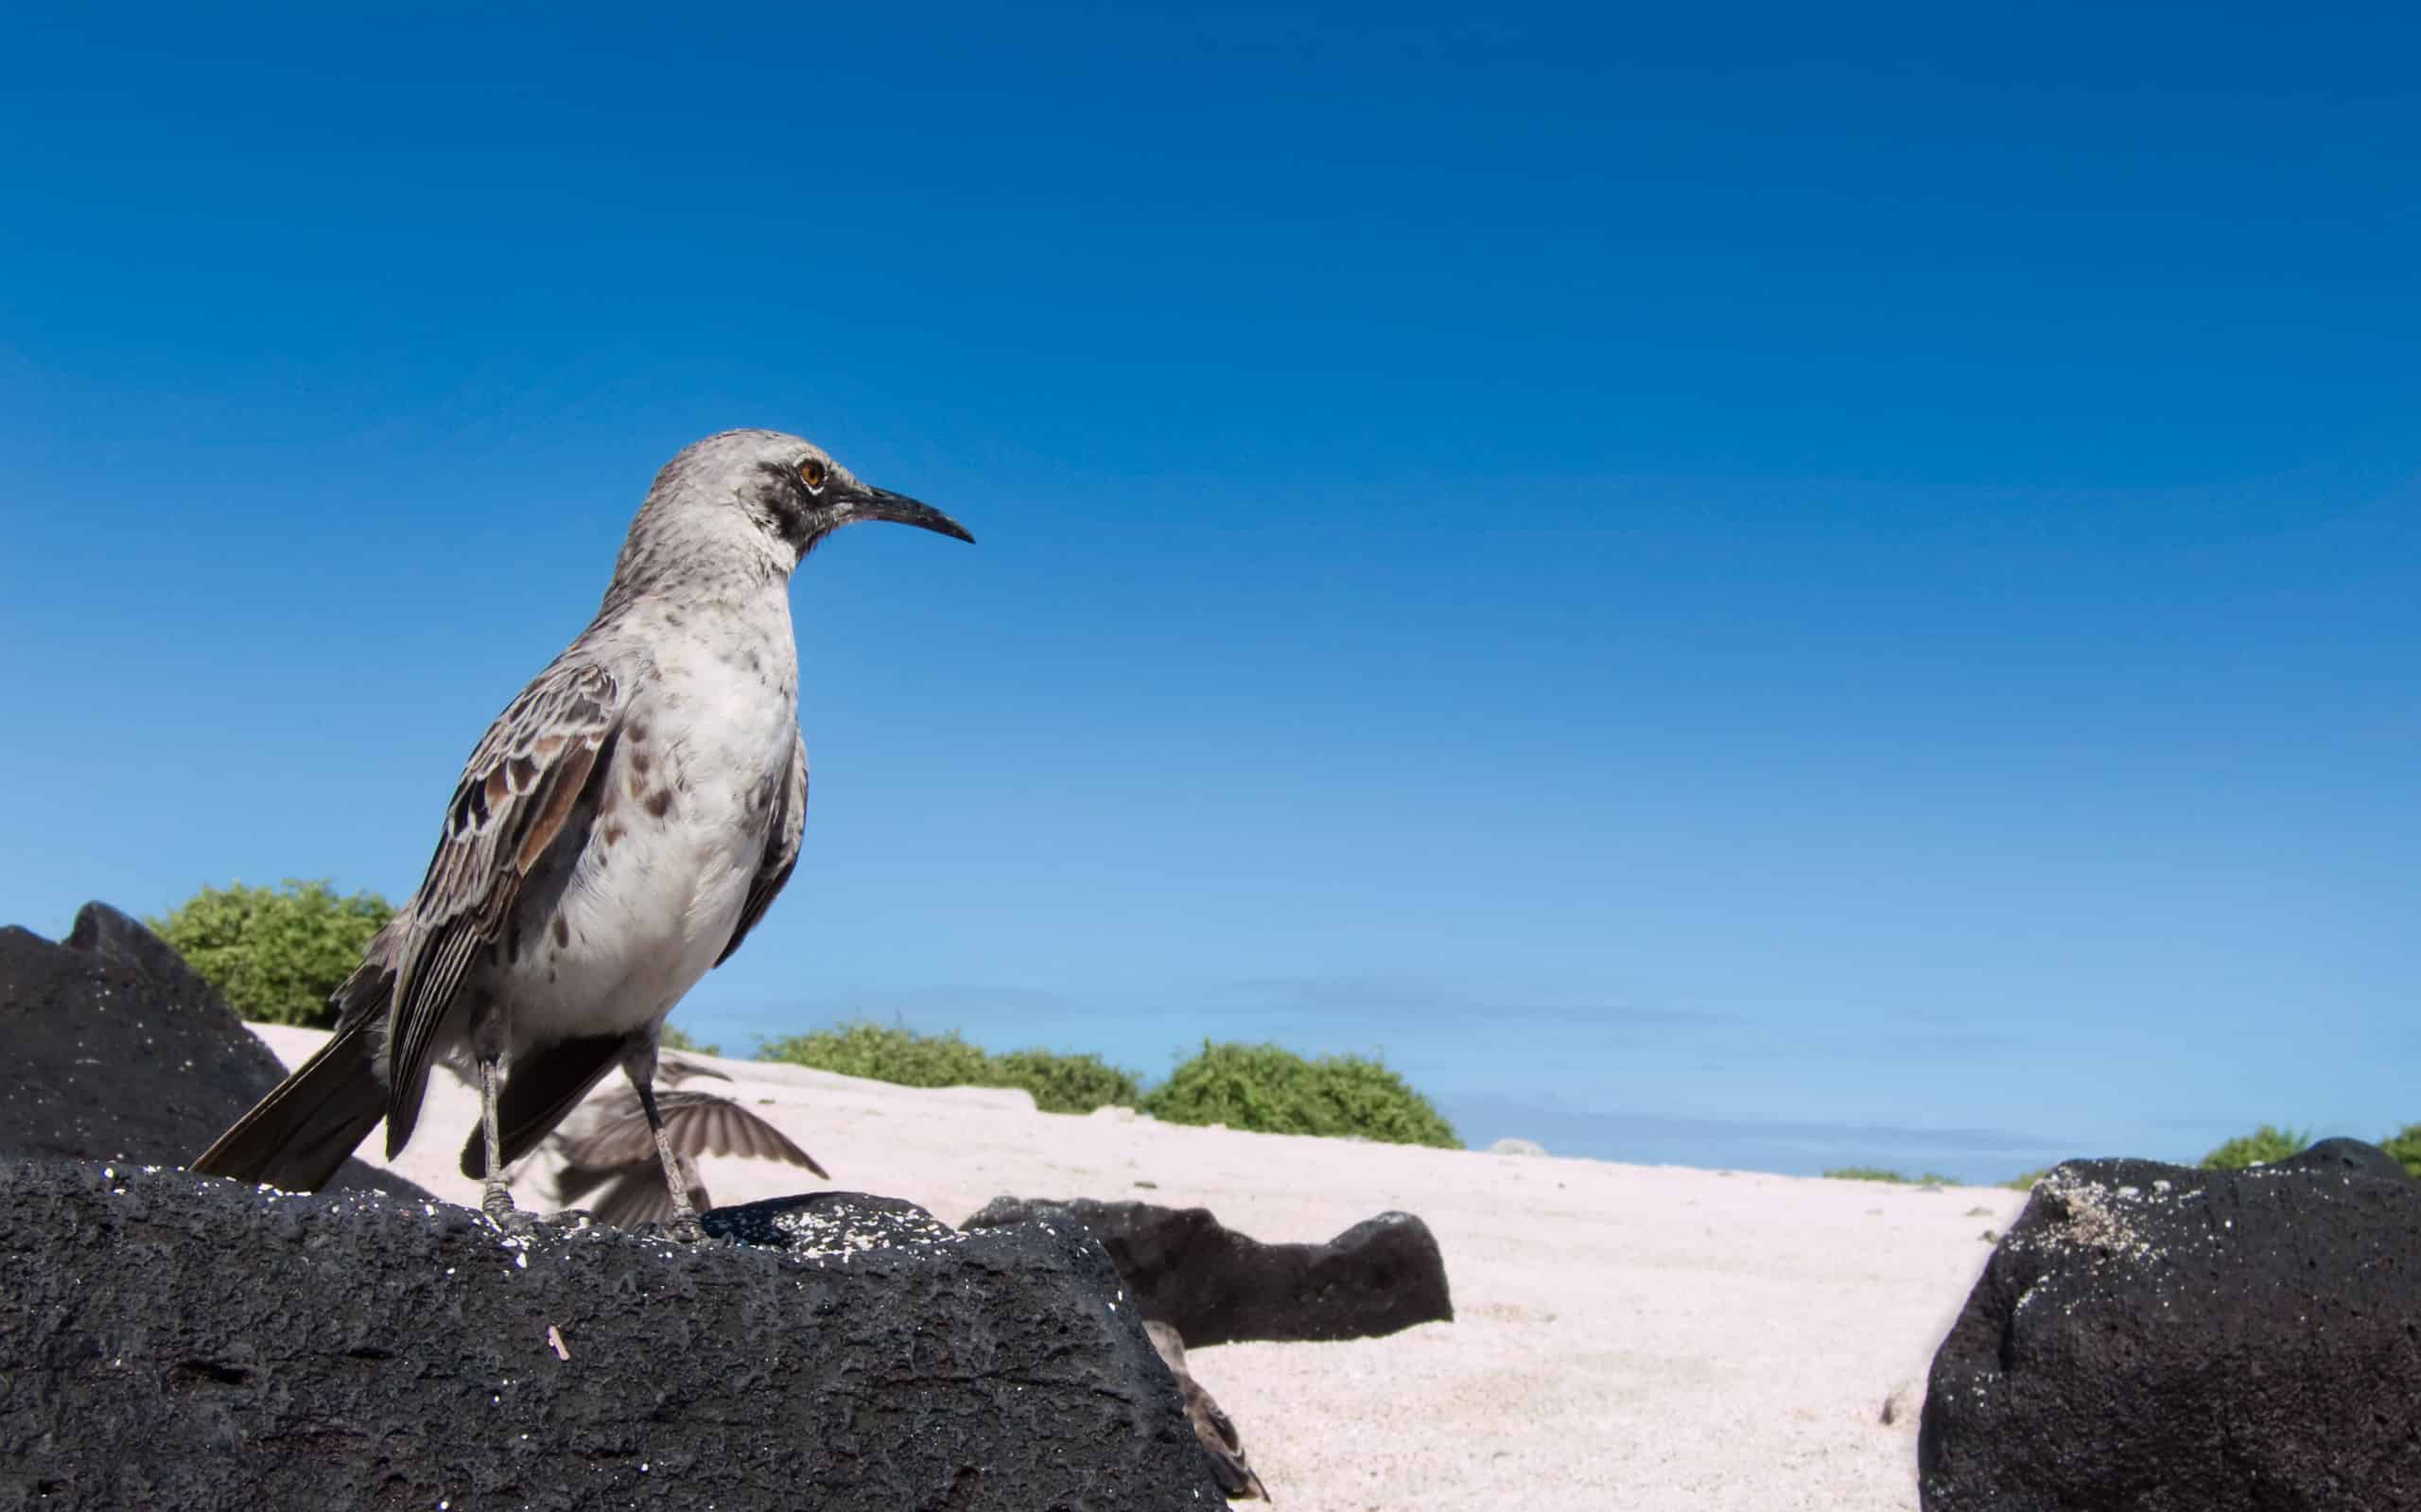 Española Mockingbird- one of the more than 25 fascinating animals of the Galapagos Islands